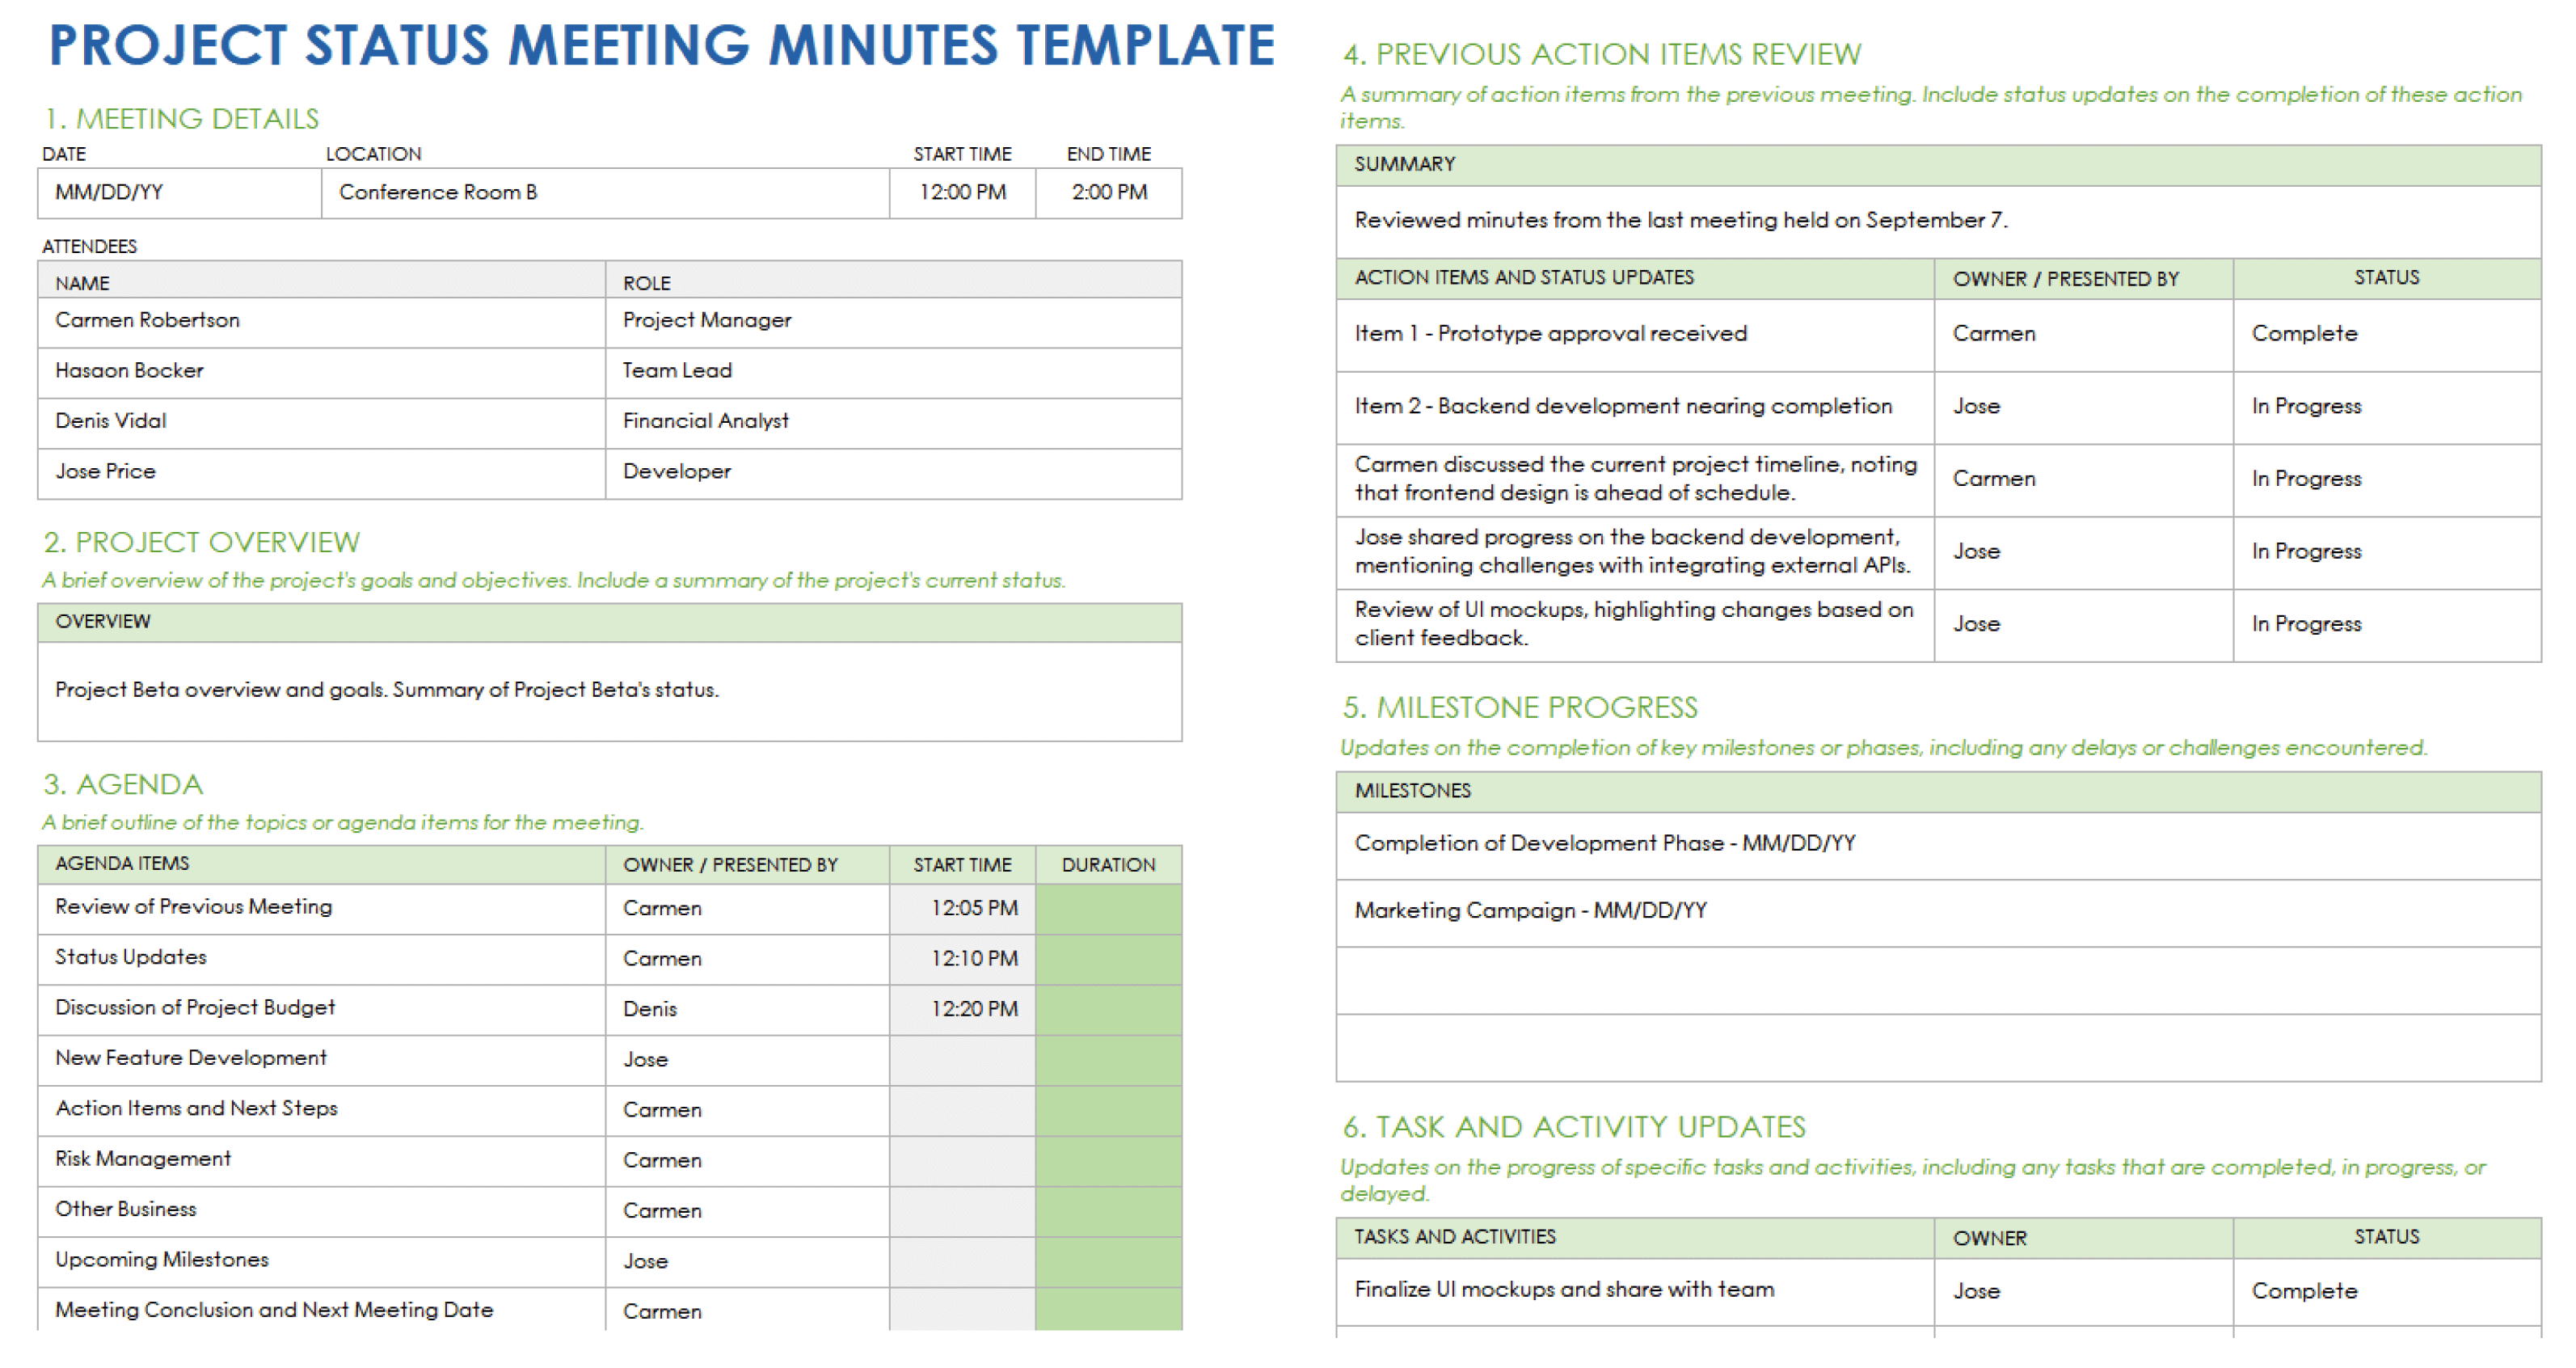 Project Status Meeting Minutes Template